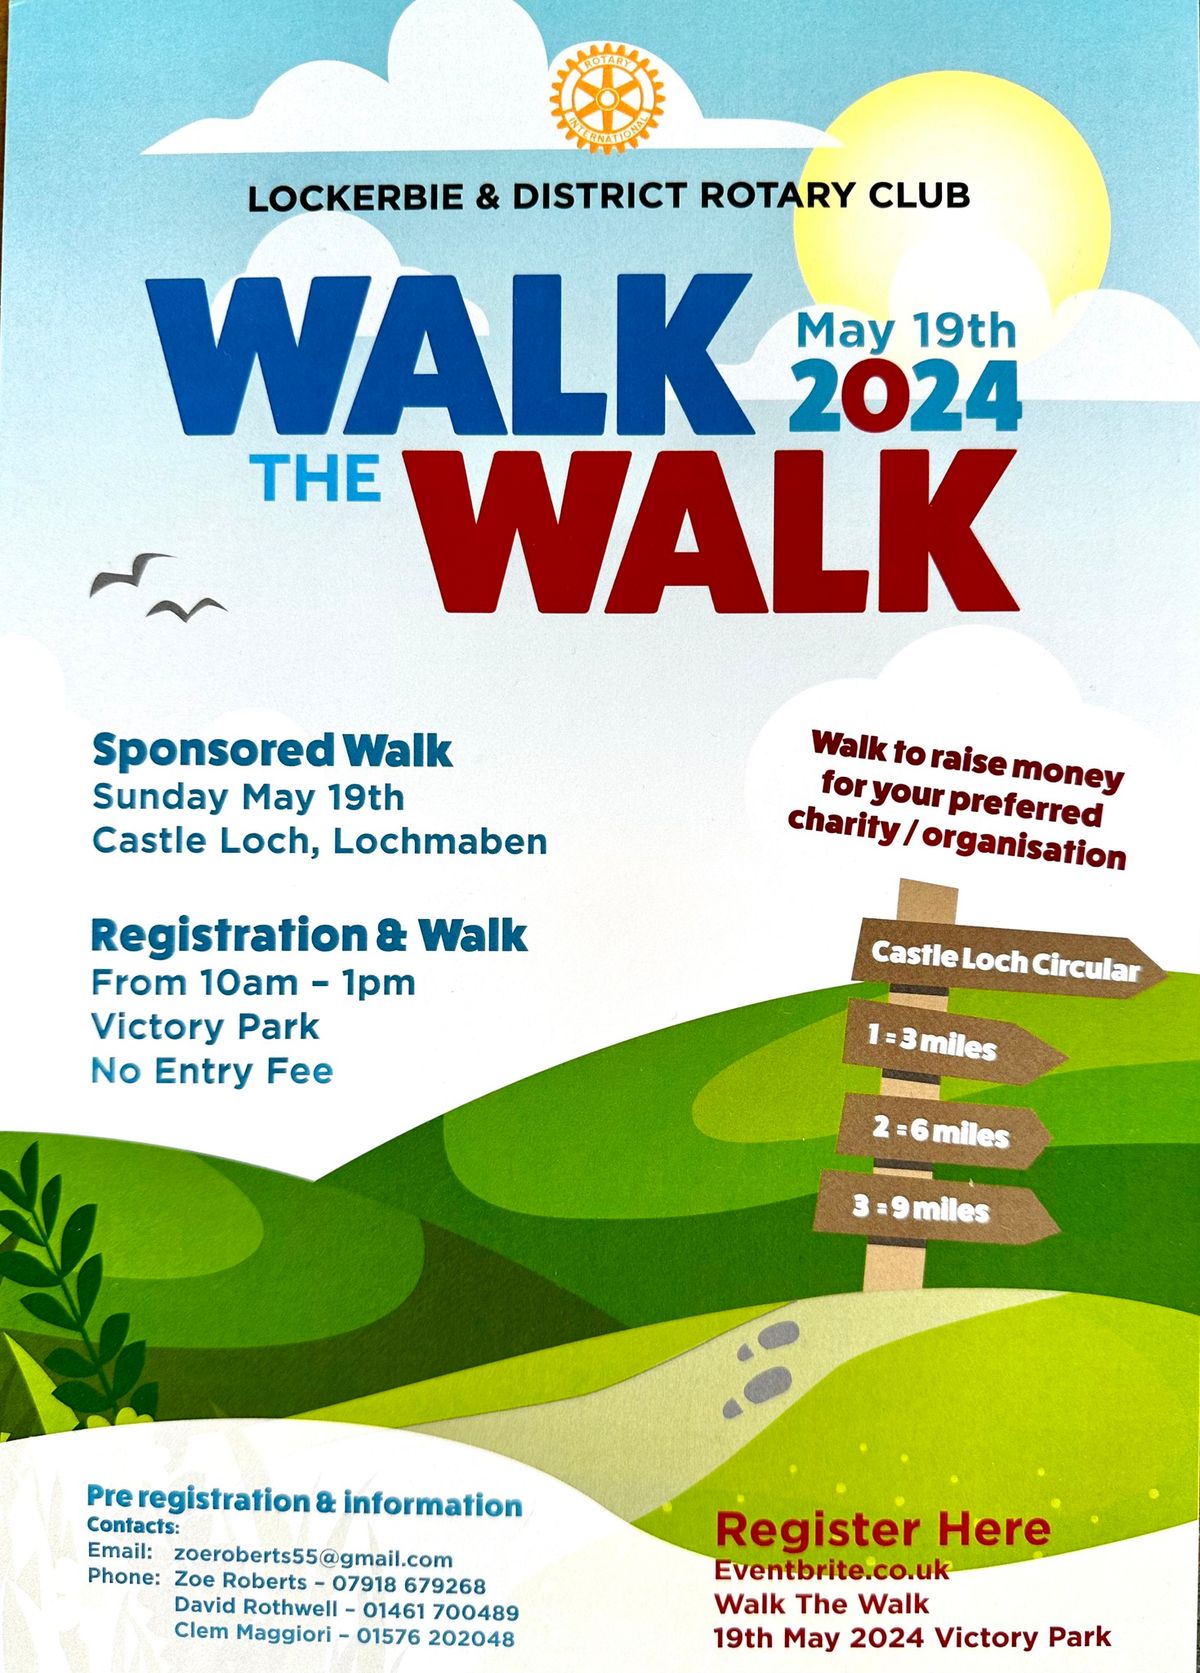 Walk the Walk - raise money for your own charity or cause